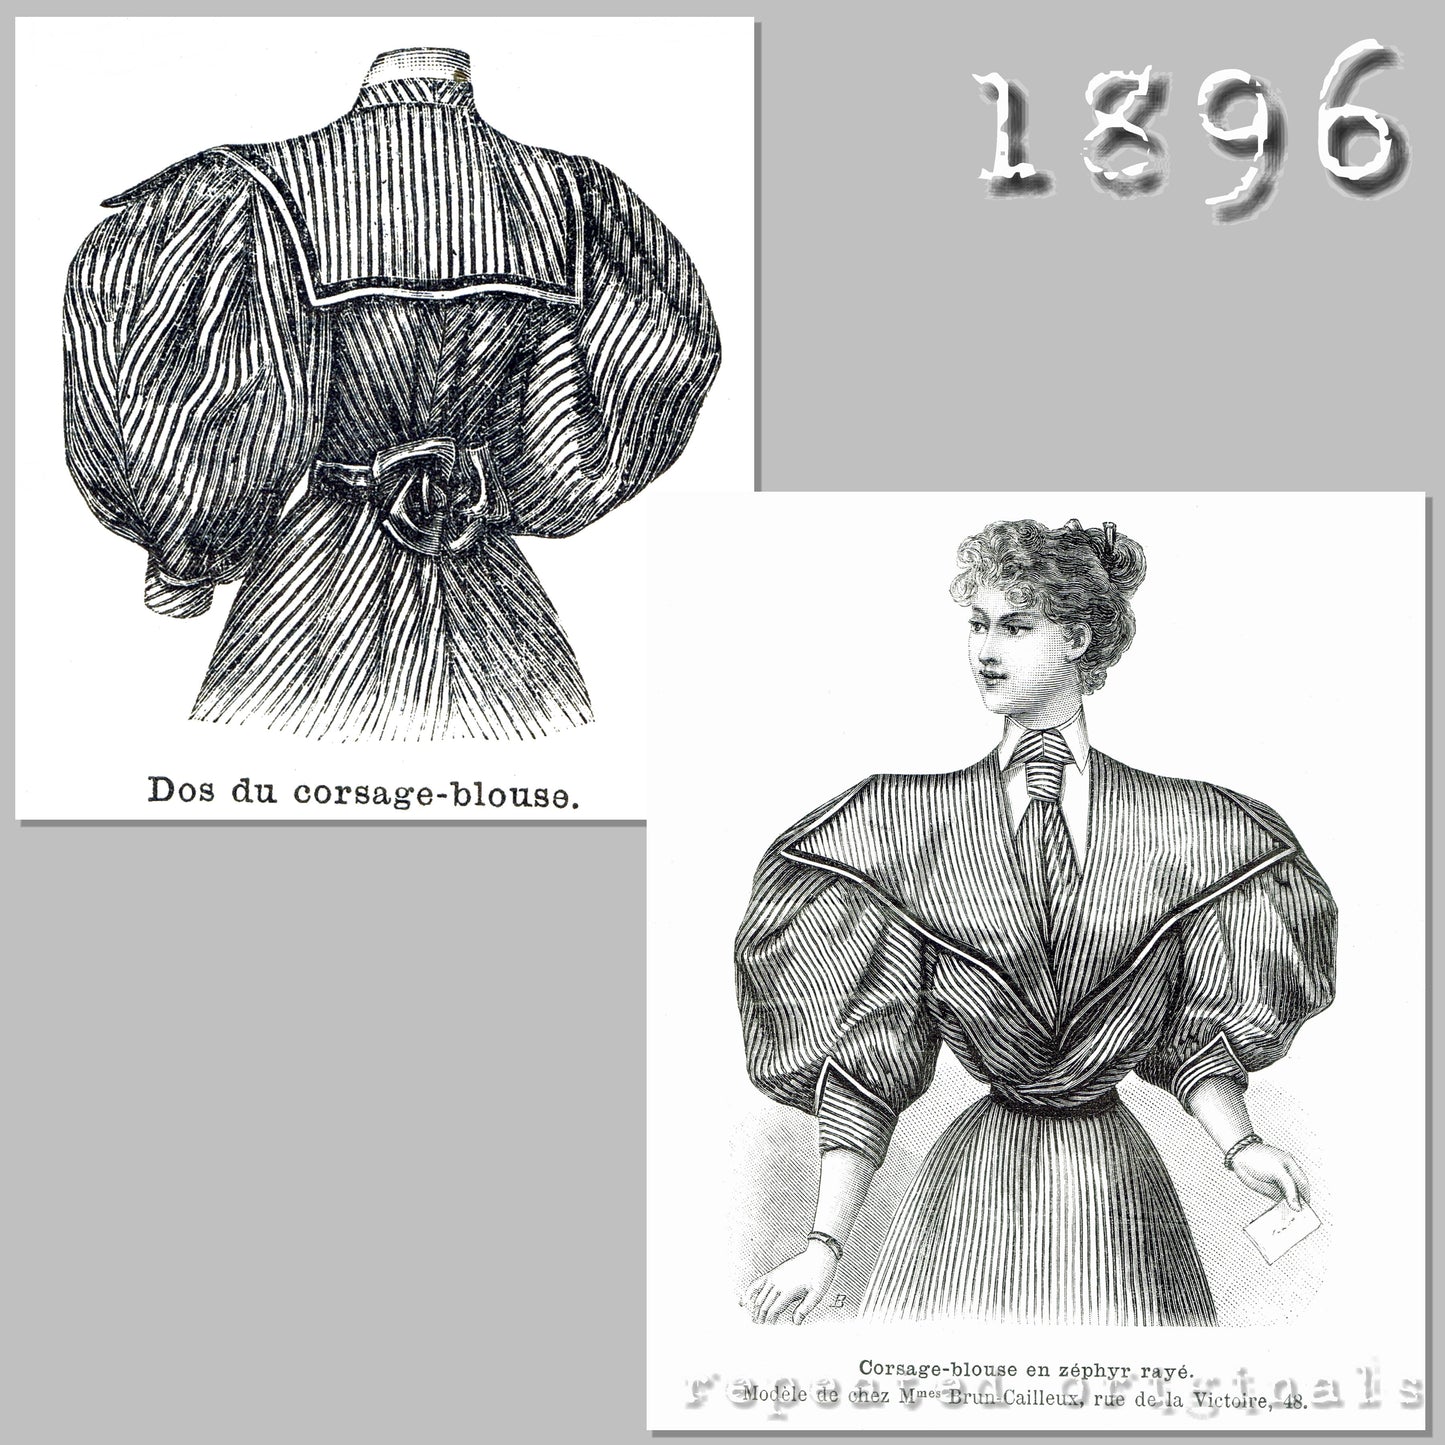 1896 Striped Blouse Dress with Collared Bib Sewing Pattern - INSTANT DOWNLOAD PDF